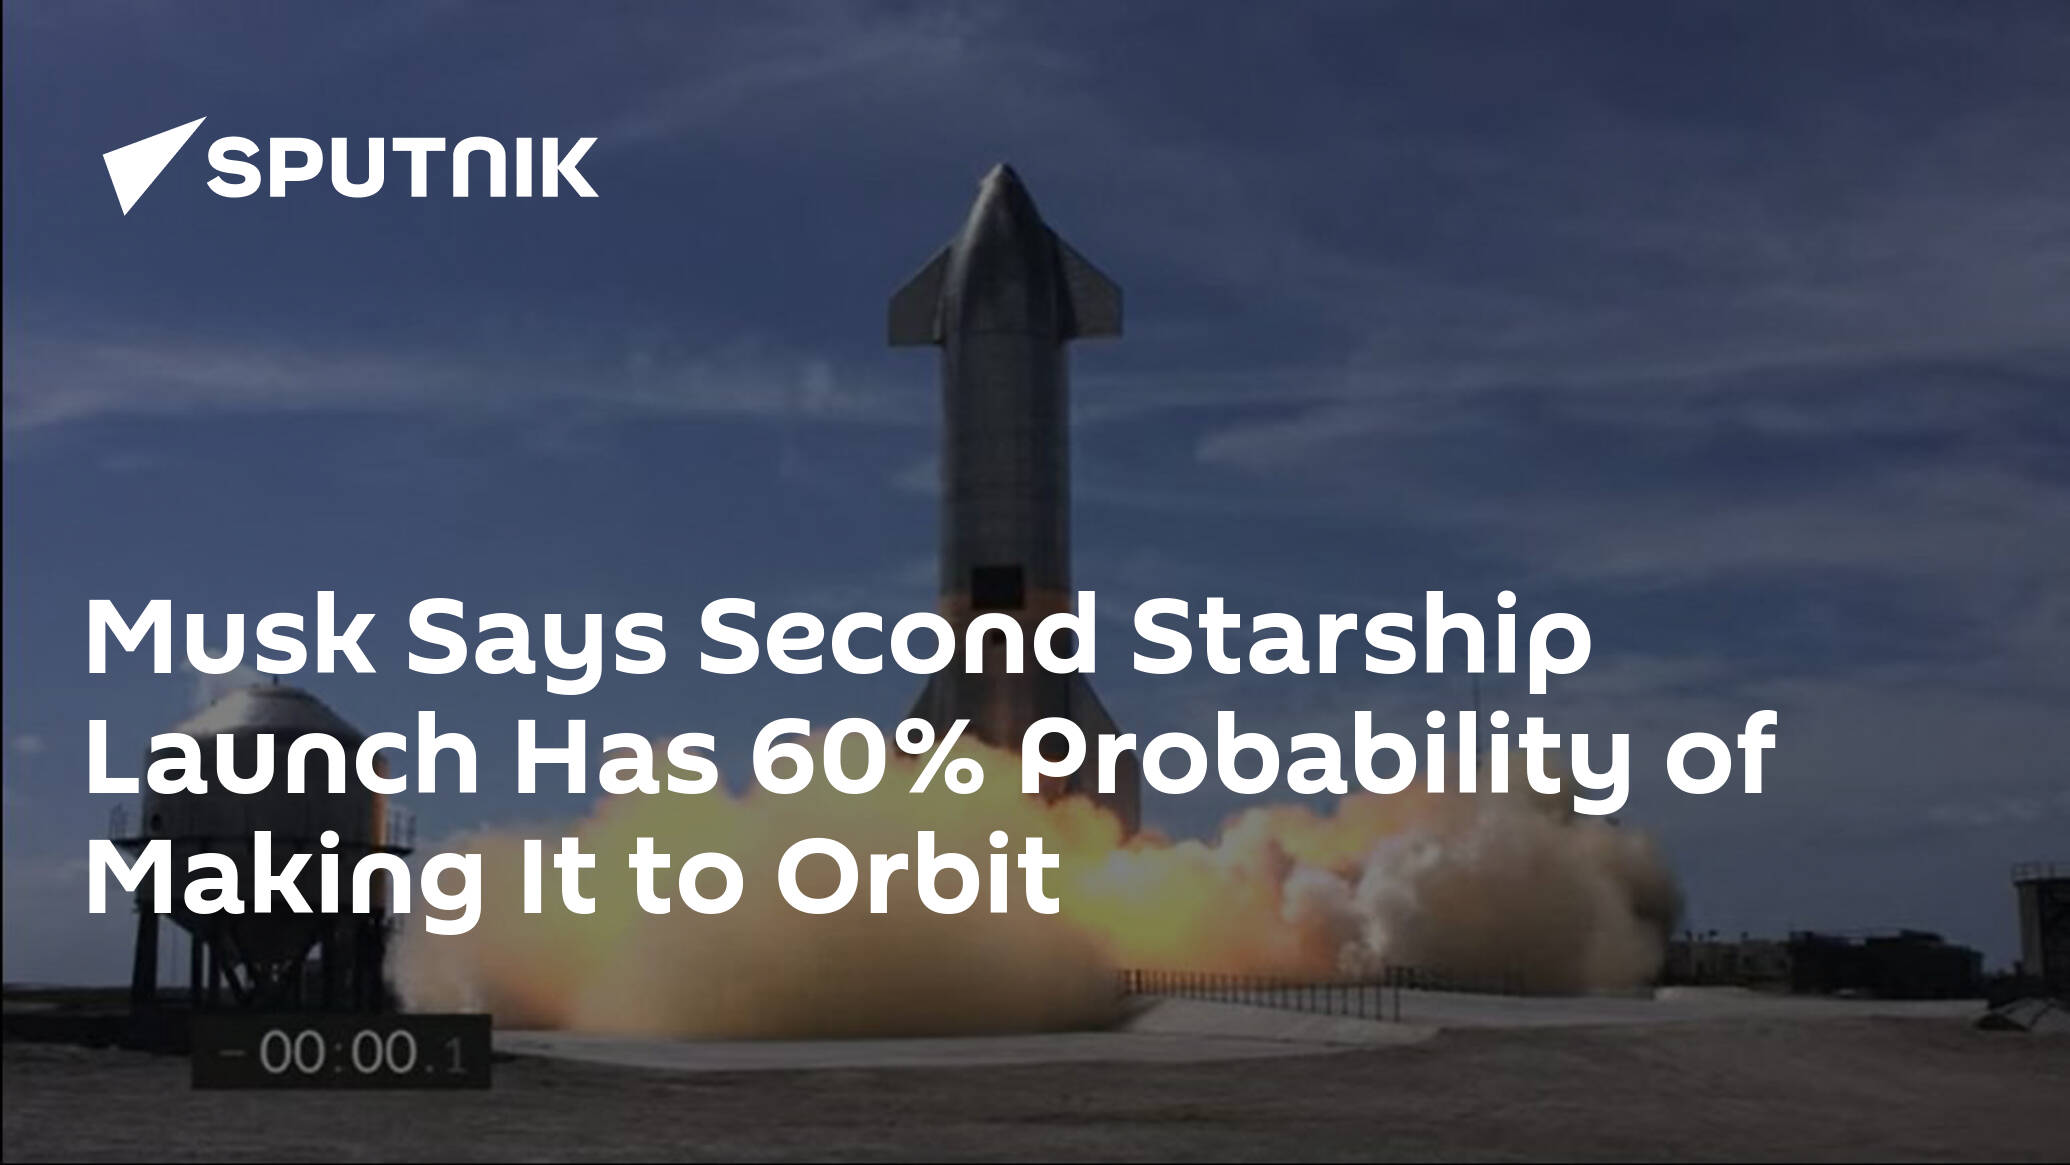 Musk Says Second Starship Launch Has 60% Probability of Making It to Orbit